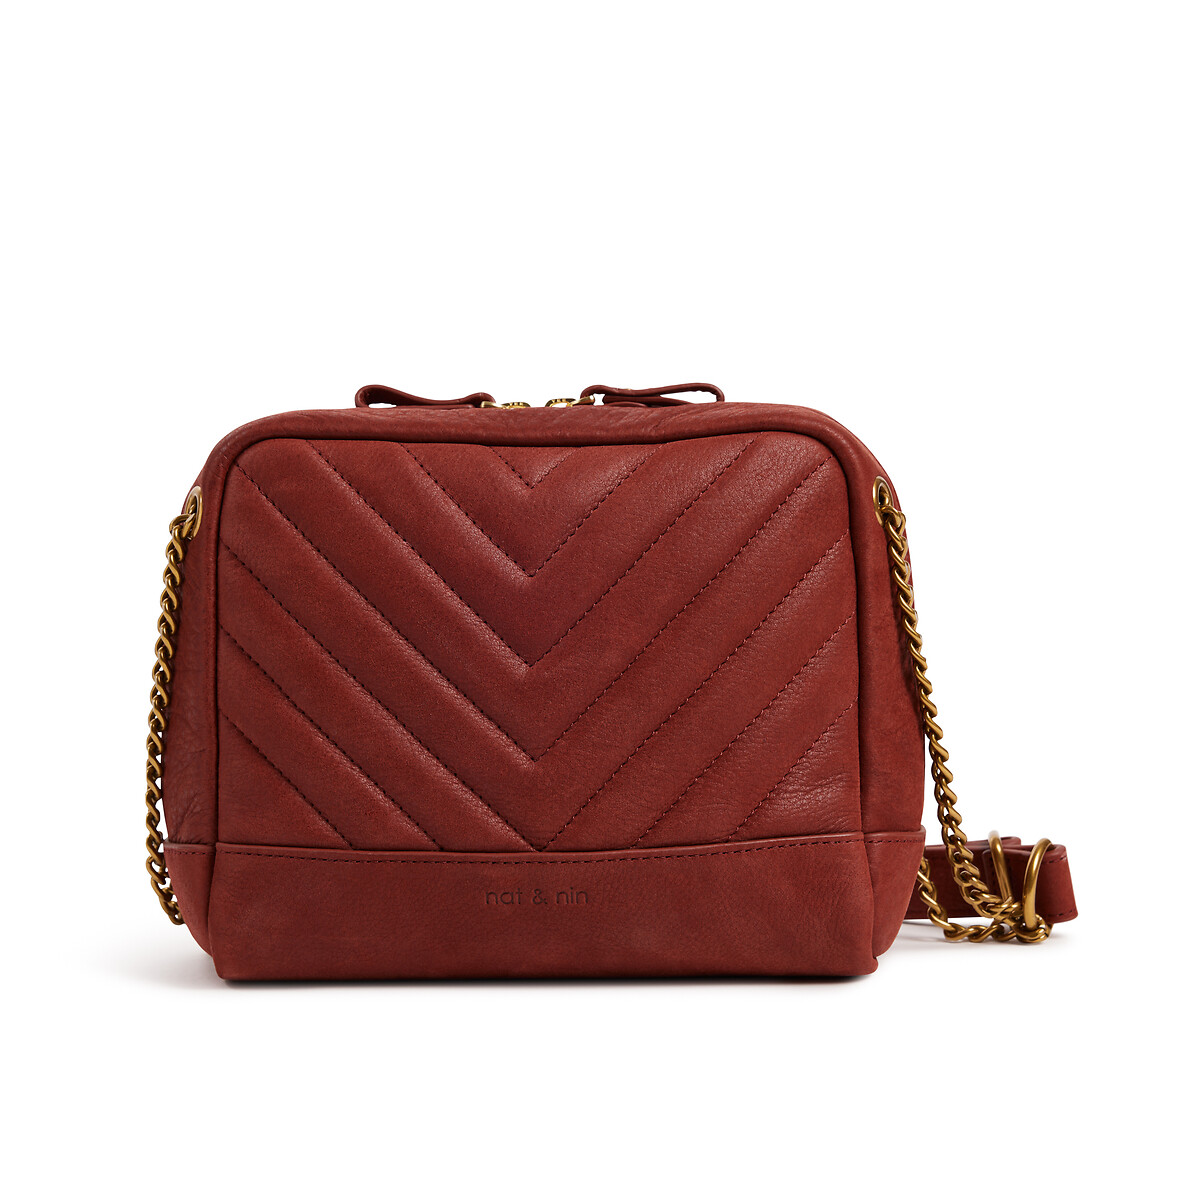 Rio Quilted Leather Handbag